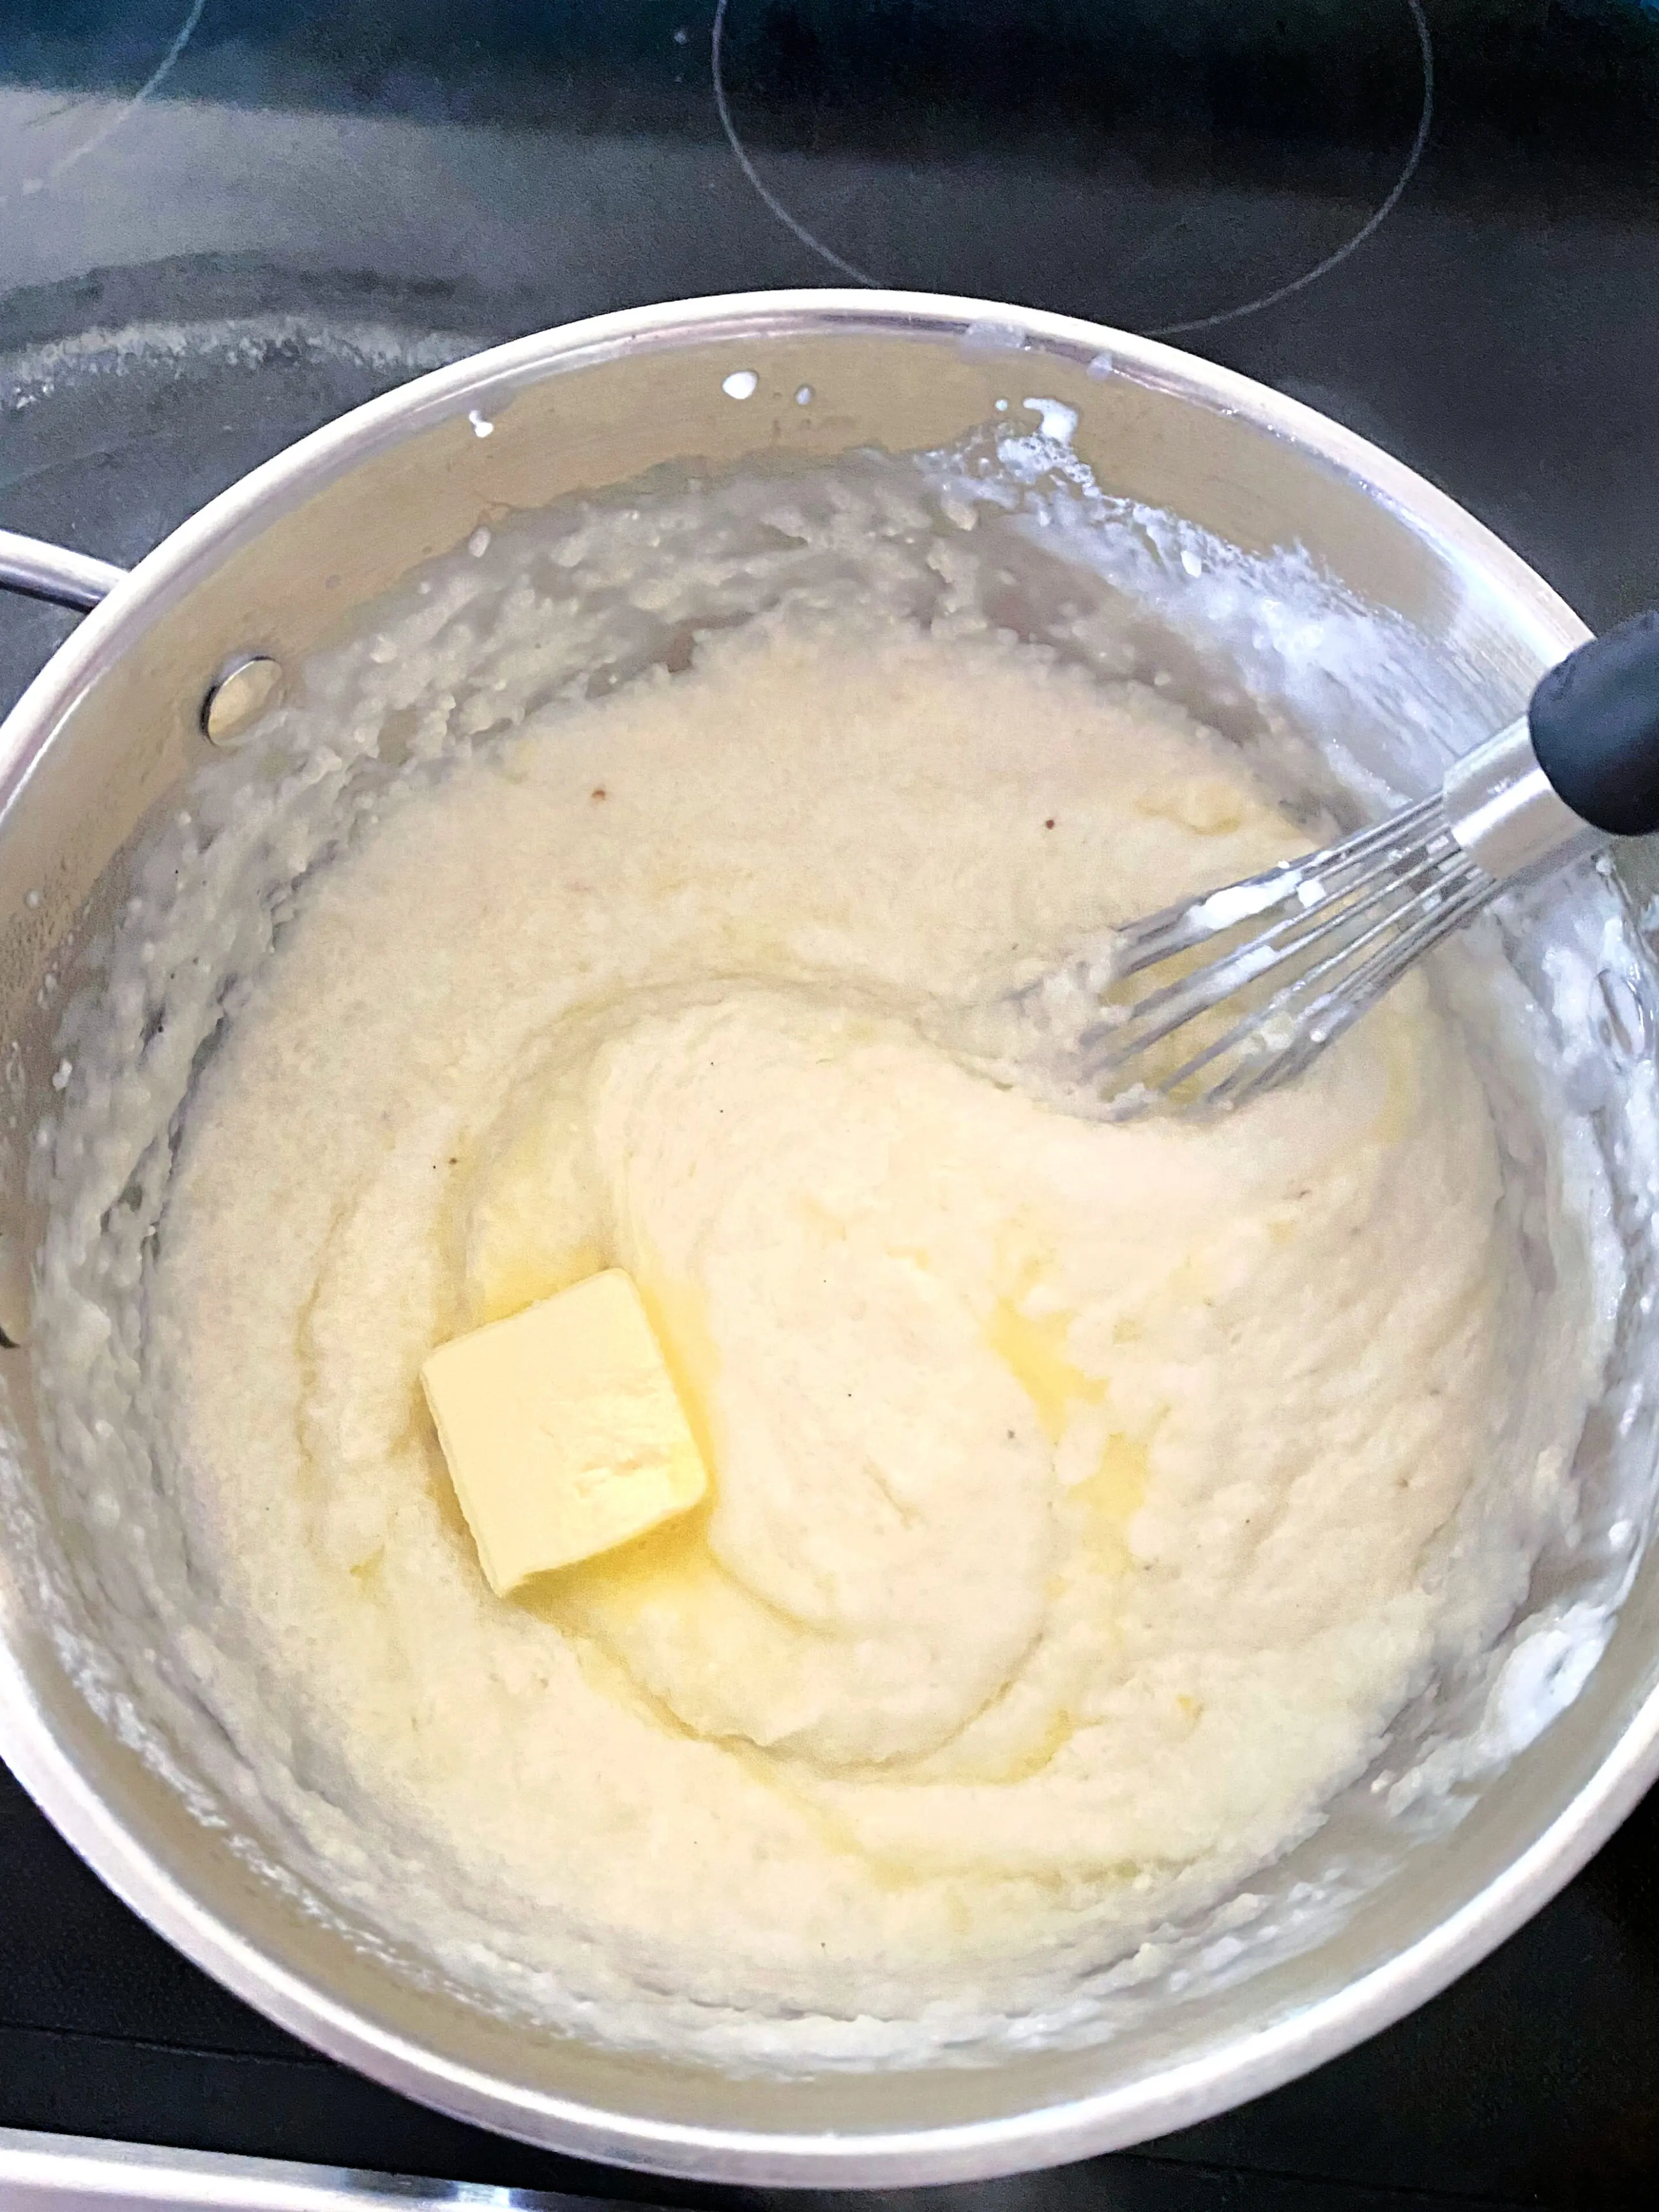 Finished cheese grits in pot after whisking with added pat of butter.